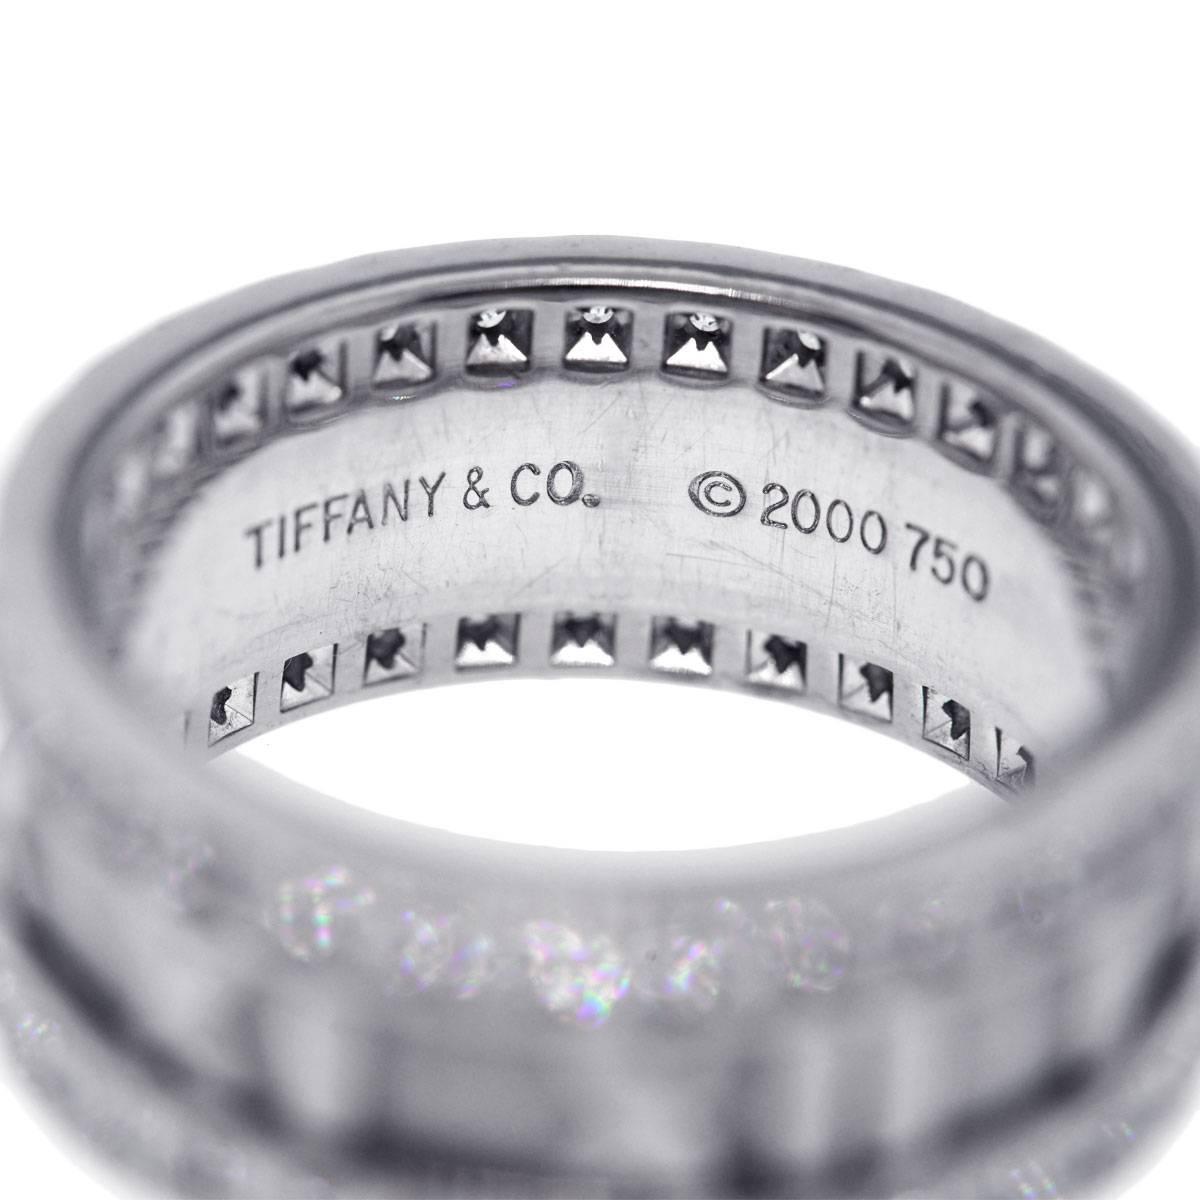 Brand: Tiffany & Co.
Collection: Atlas
Material: 18k White Gold
Diamond Details: Approximately 1.31ctw round brilliant cut diamonds. Diamonds are G/H in color and VS in clarity.
Total Weight: 10.7g (6.8dwt)
Measurements: 0.80" x 0.35"